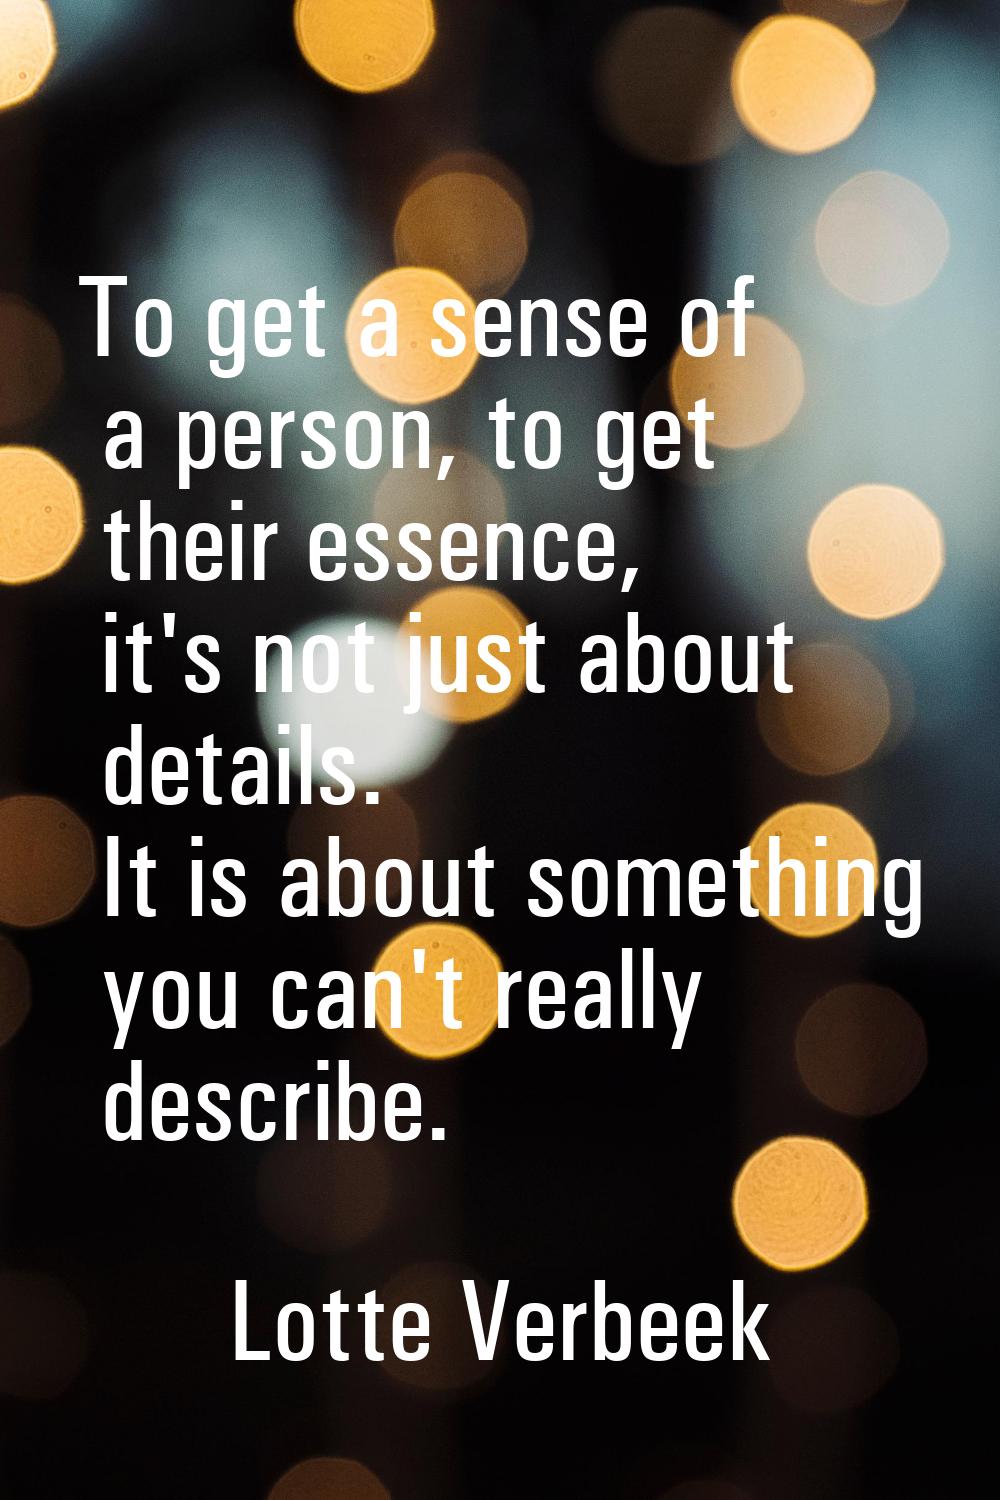 To get a sense of a person, to get their essence, it's not just about details. It is about somethin